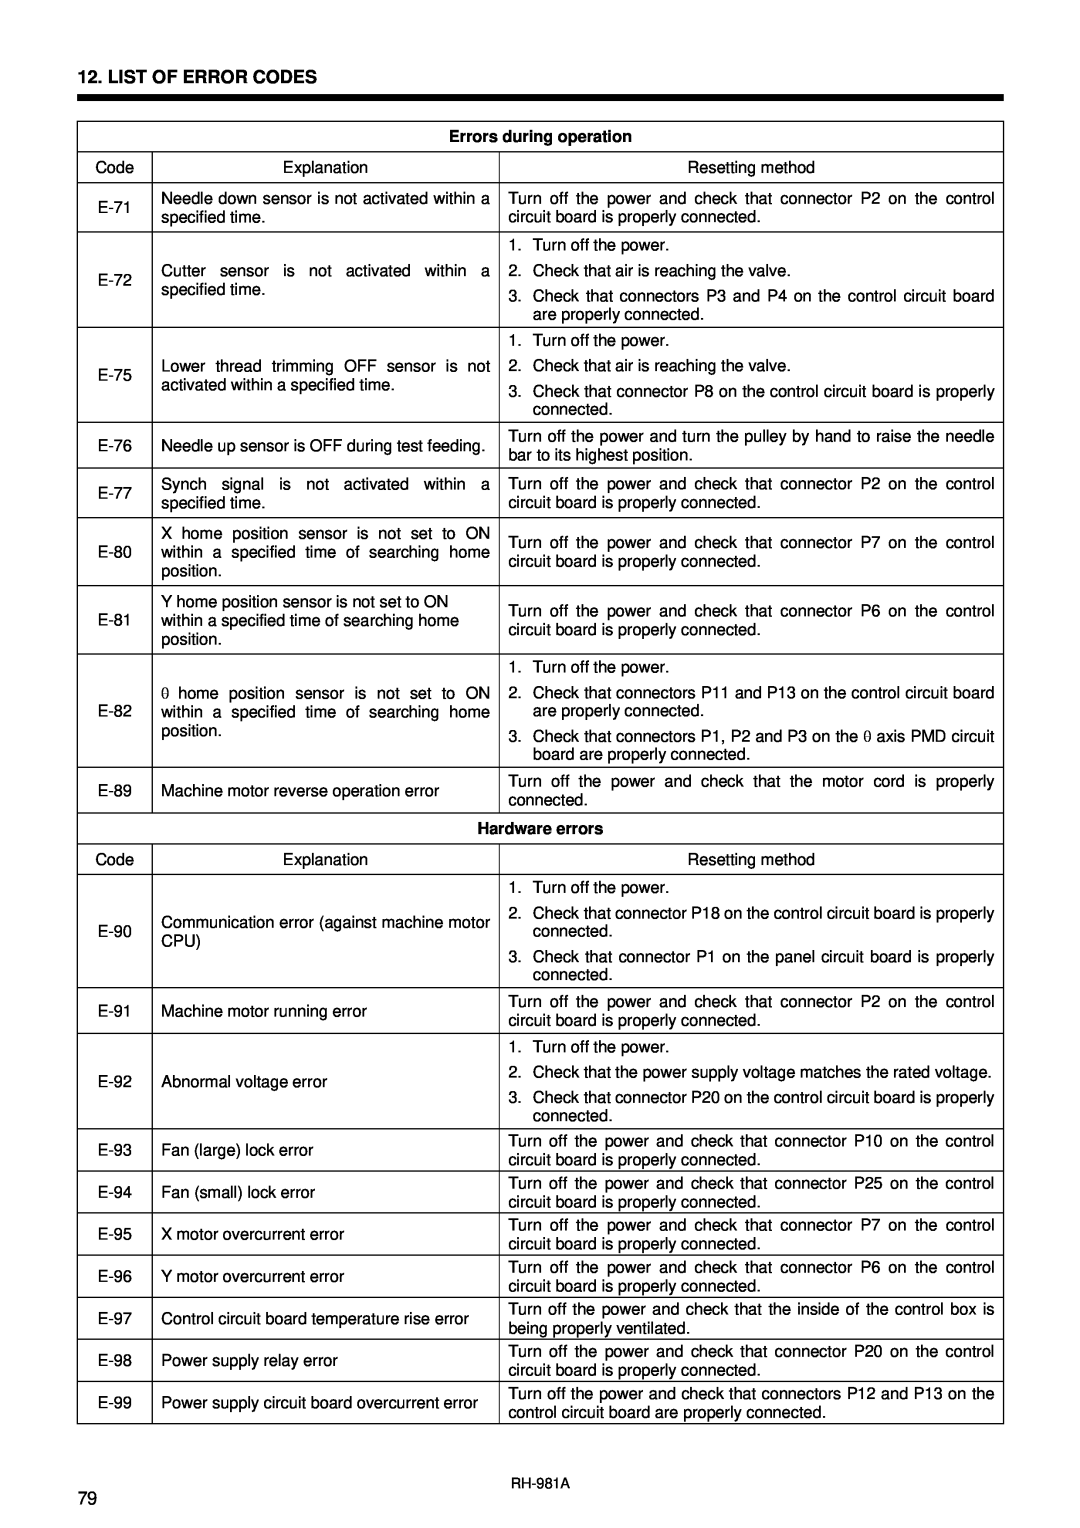 Brother rh-918a manual List Of Error Codes, Errors during operation, Hardware errors 